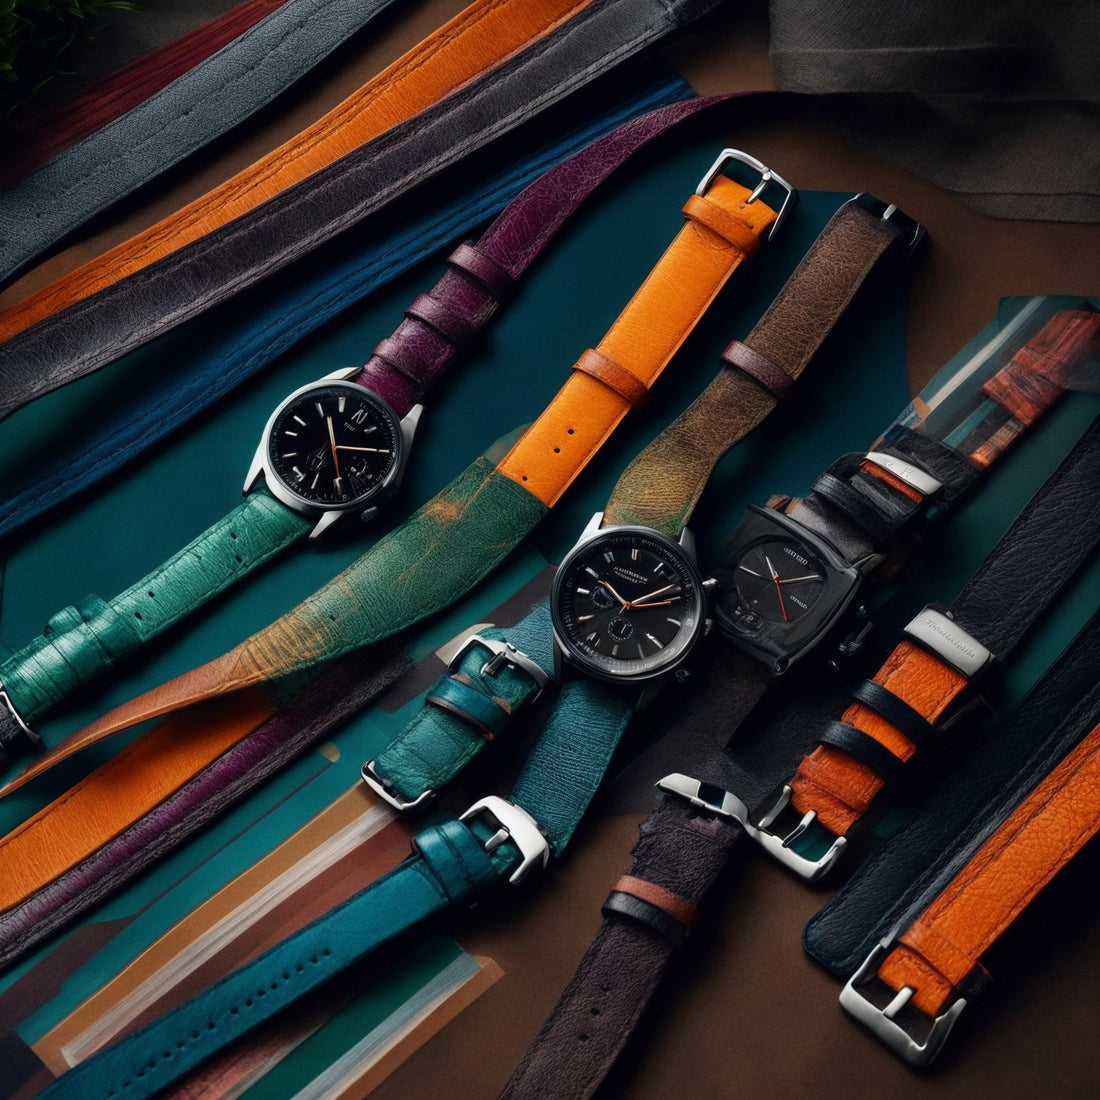 The Ultimate Accessory: Crocodile Leather Handmade Watch Bands